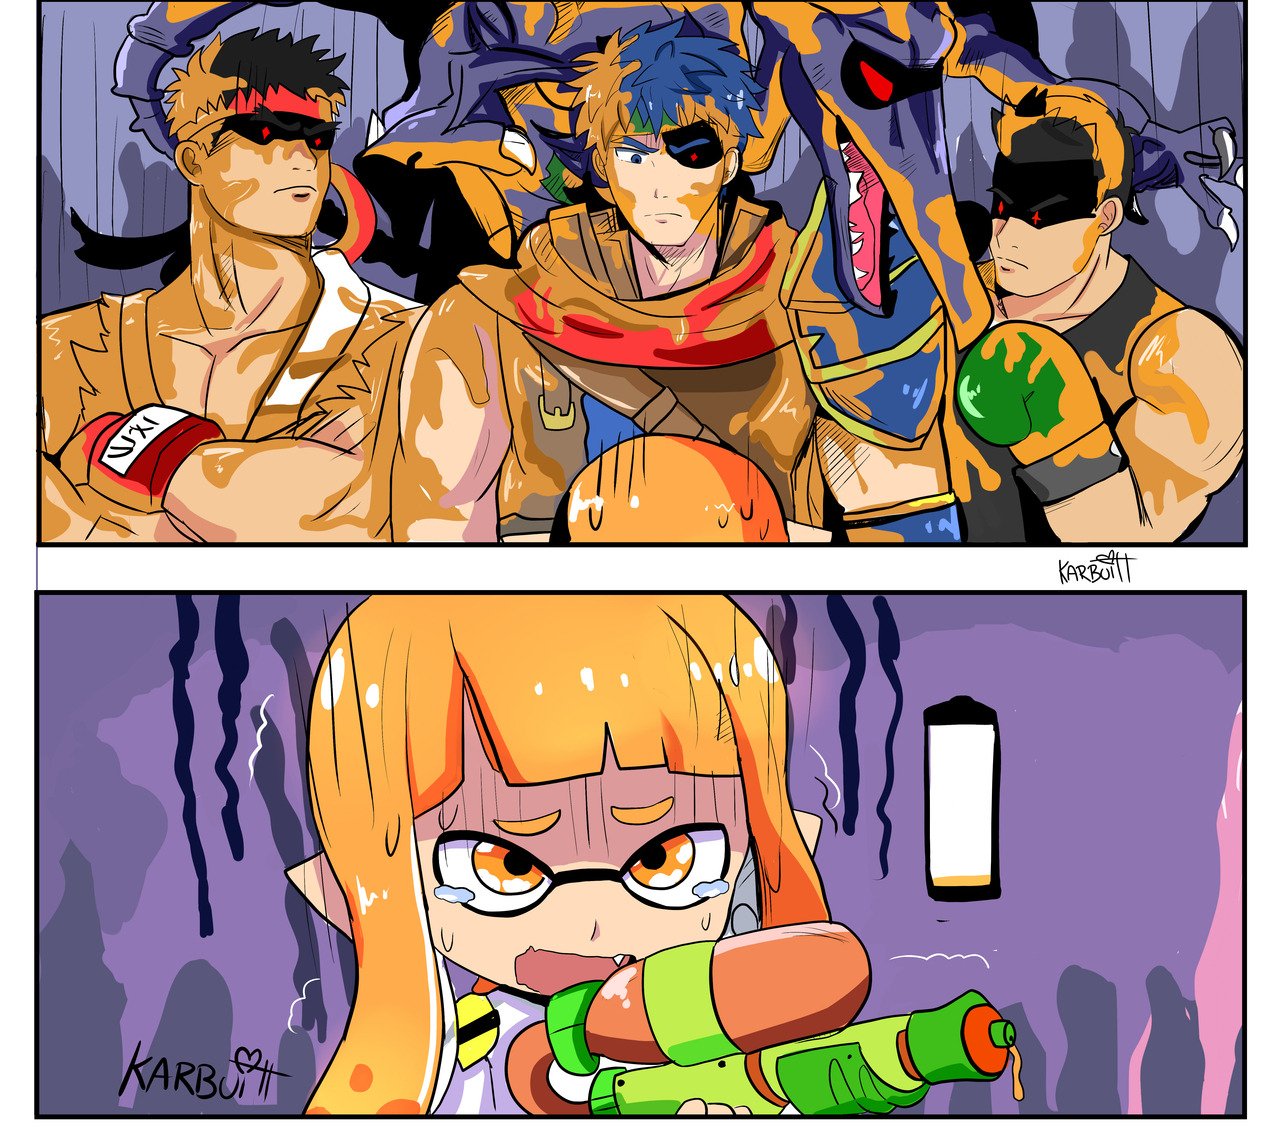 “Me when i played to smash bros ultimate 
Ryu: .... 
Ike: P...